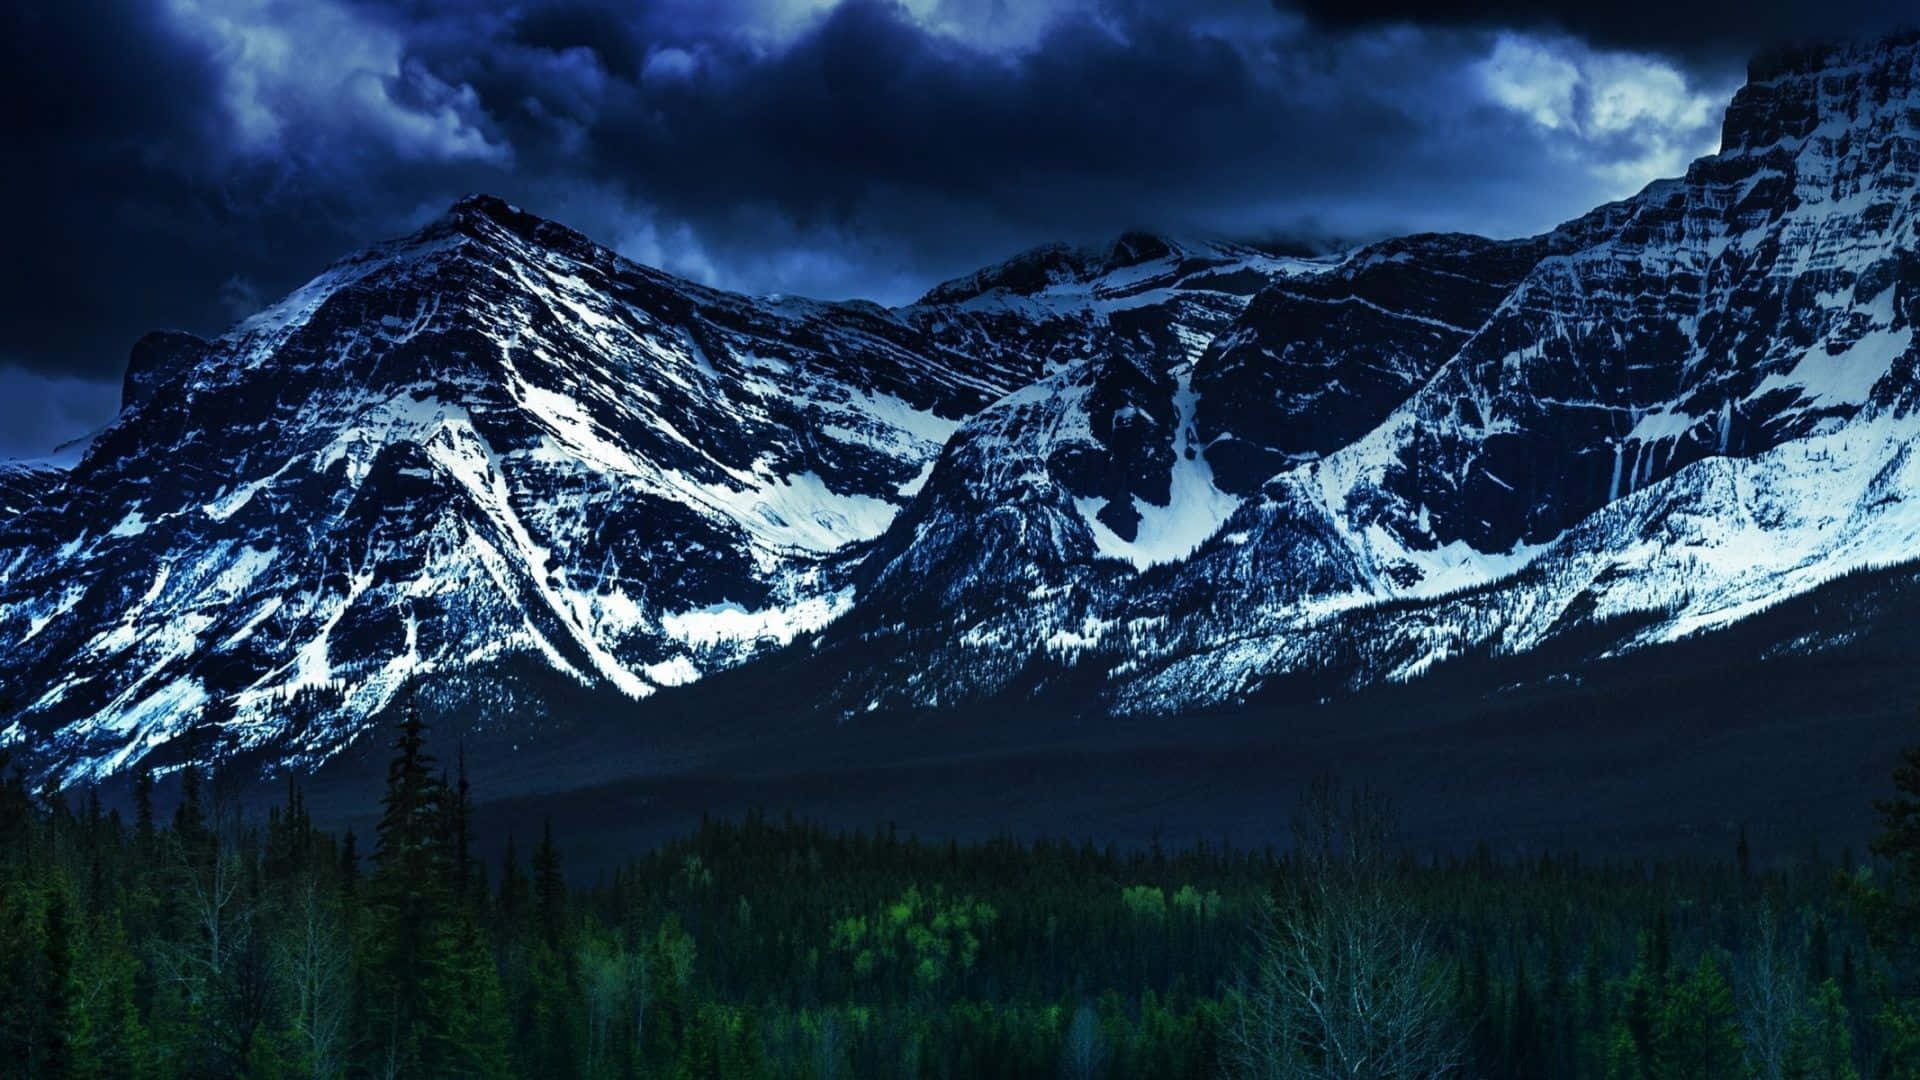 A Mountain Range With Trees And A Dark Sky